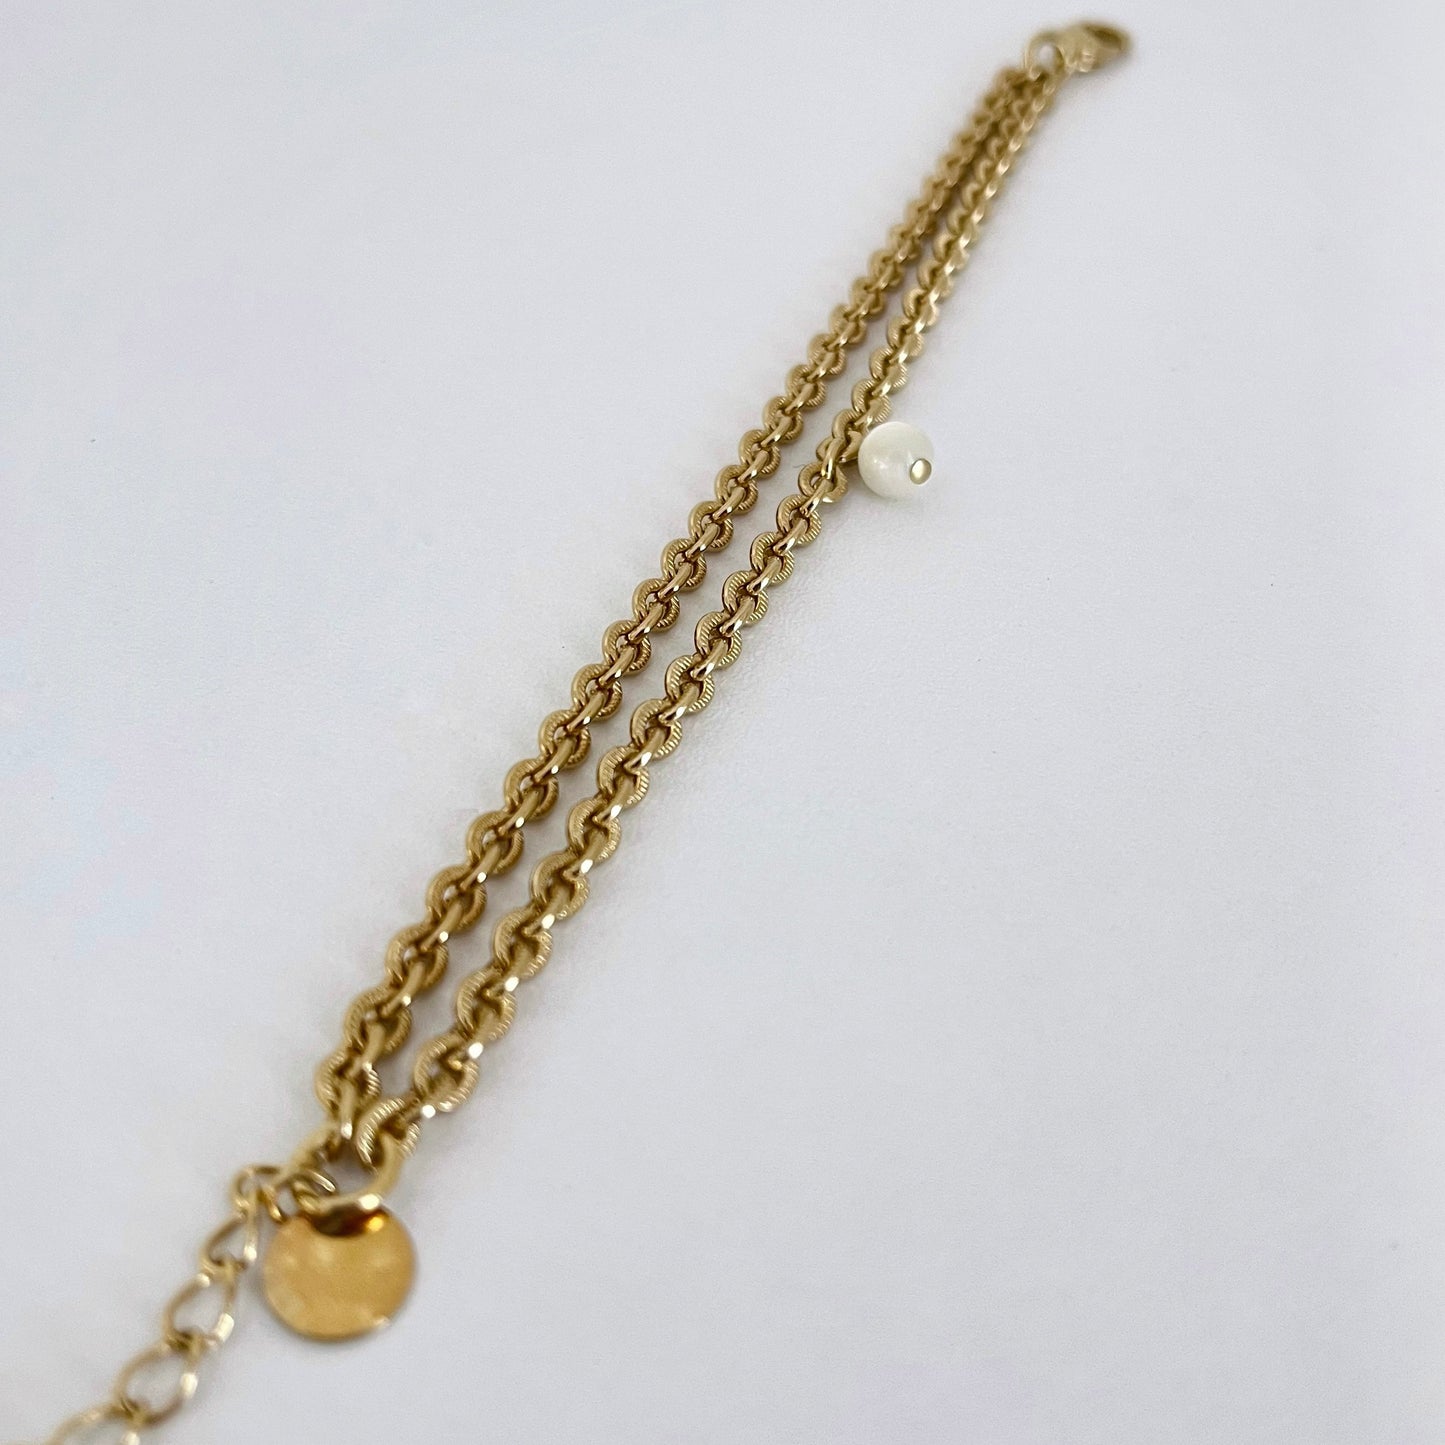 Double Chain Bracelet with Pearl